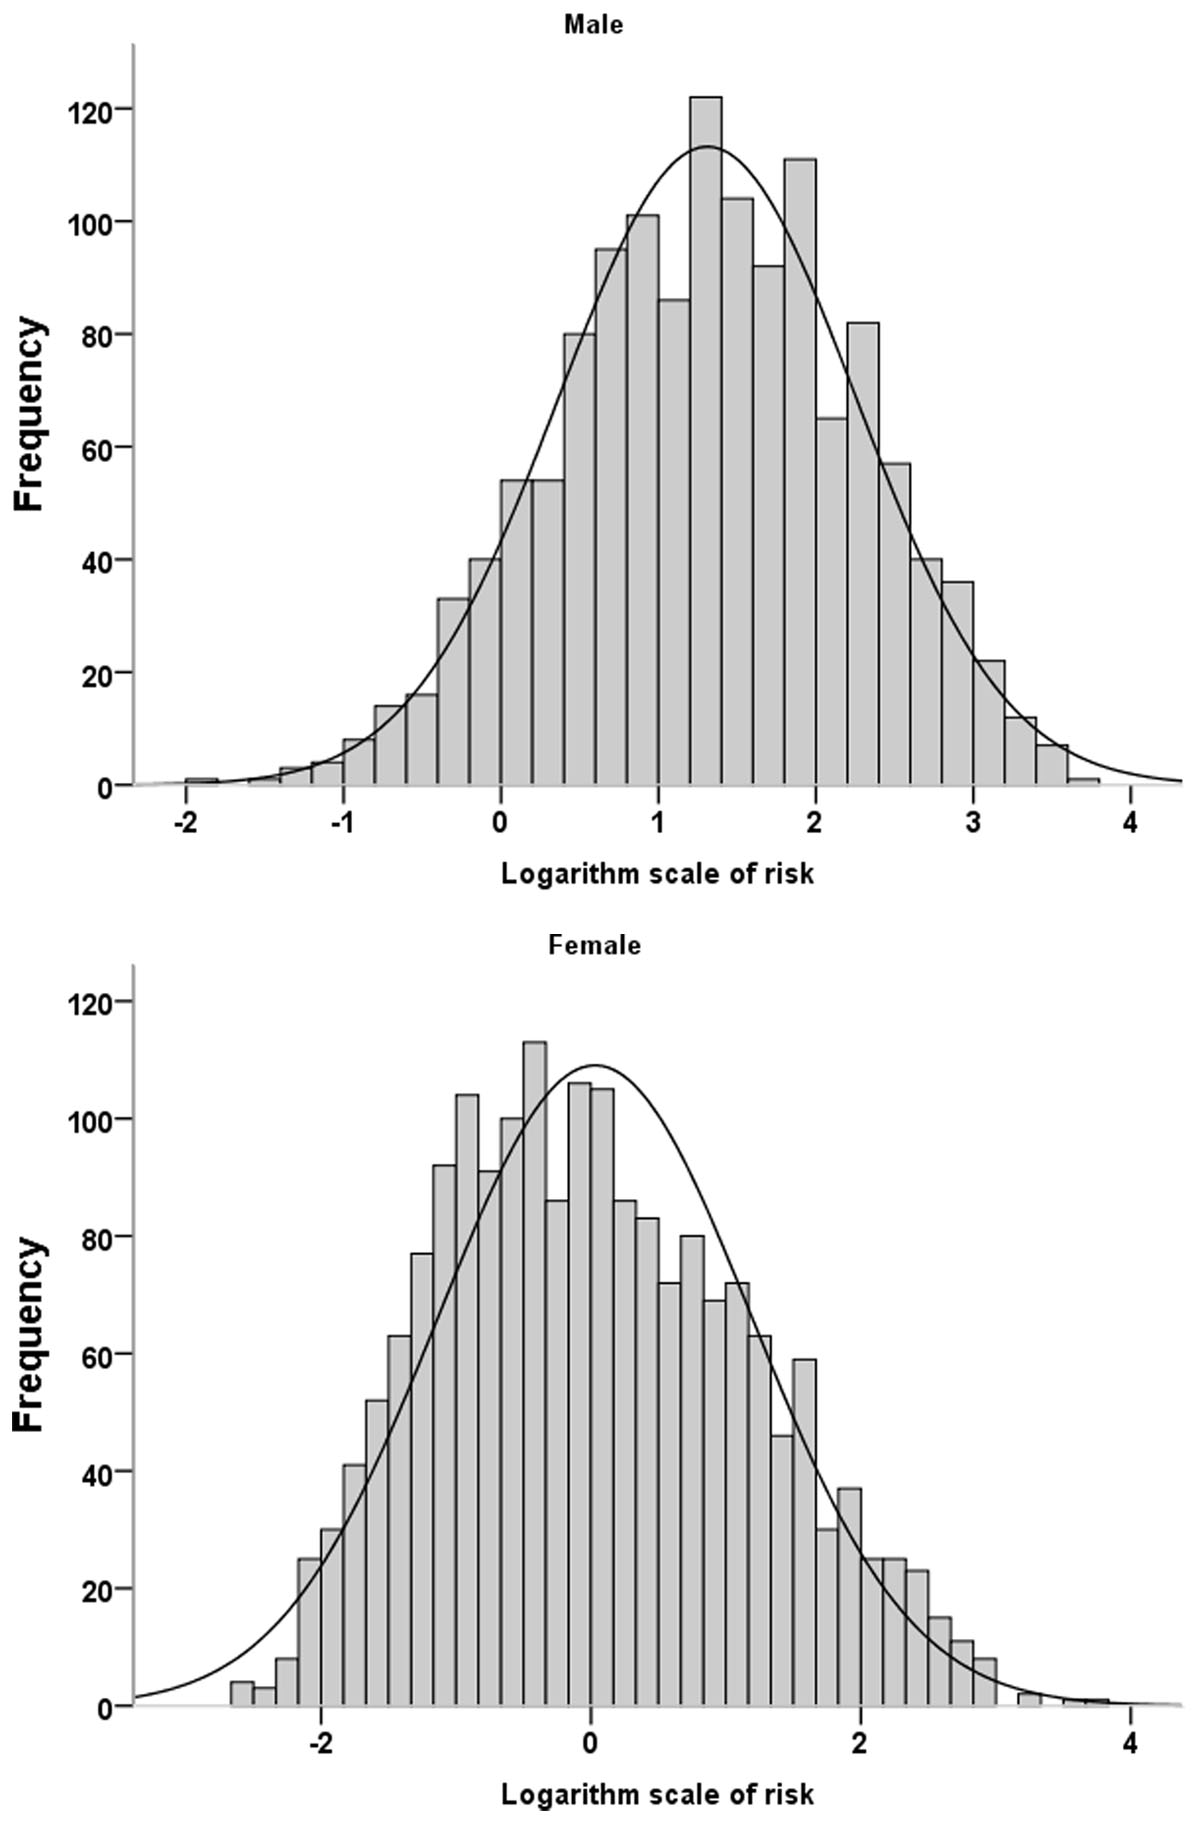 Histograms of logarithm scale of the ACC-AHA risk score in males and females